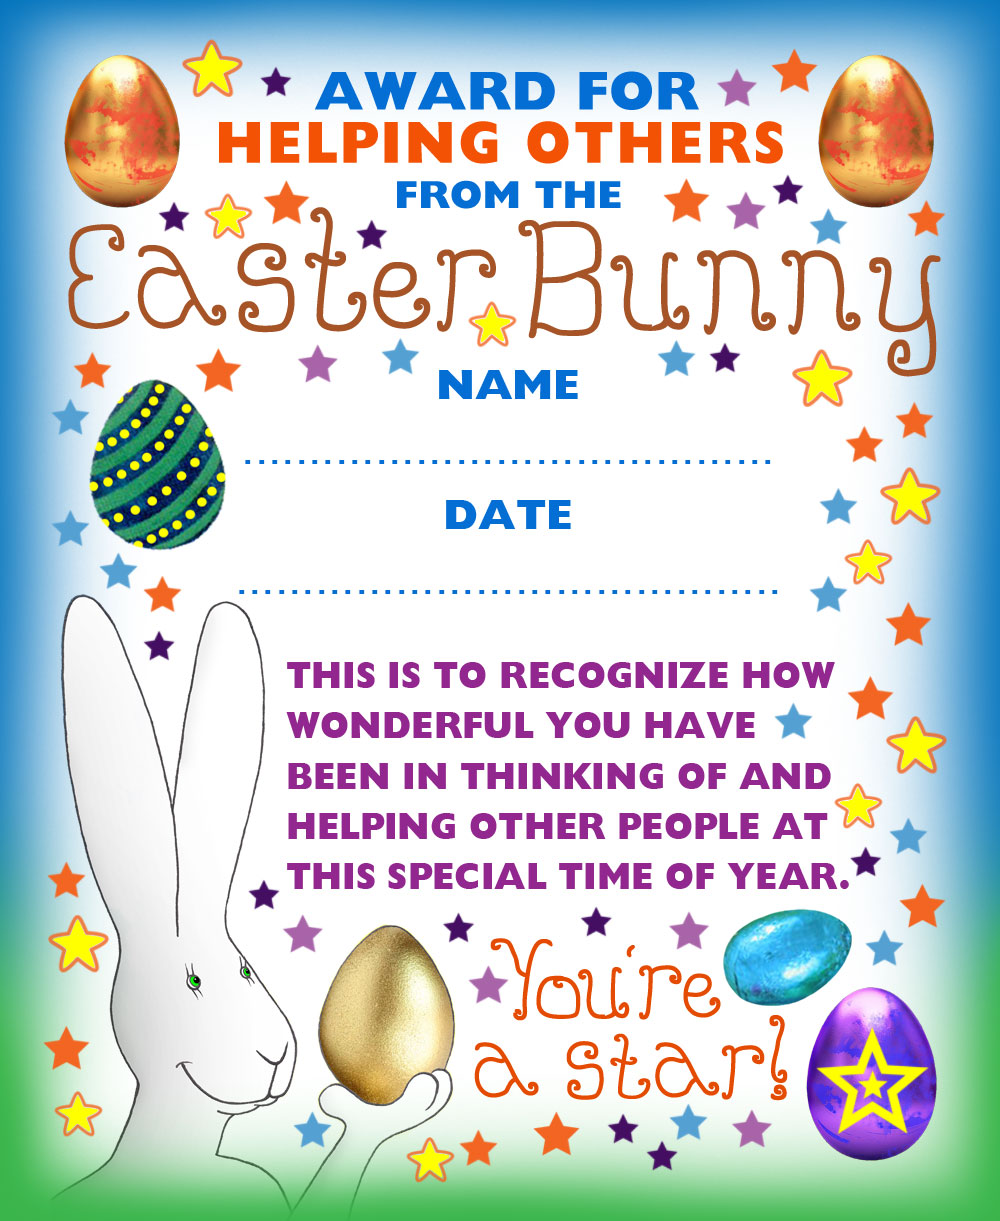 Printable award for helping others from the Easter Bunny.